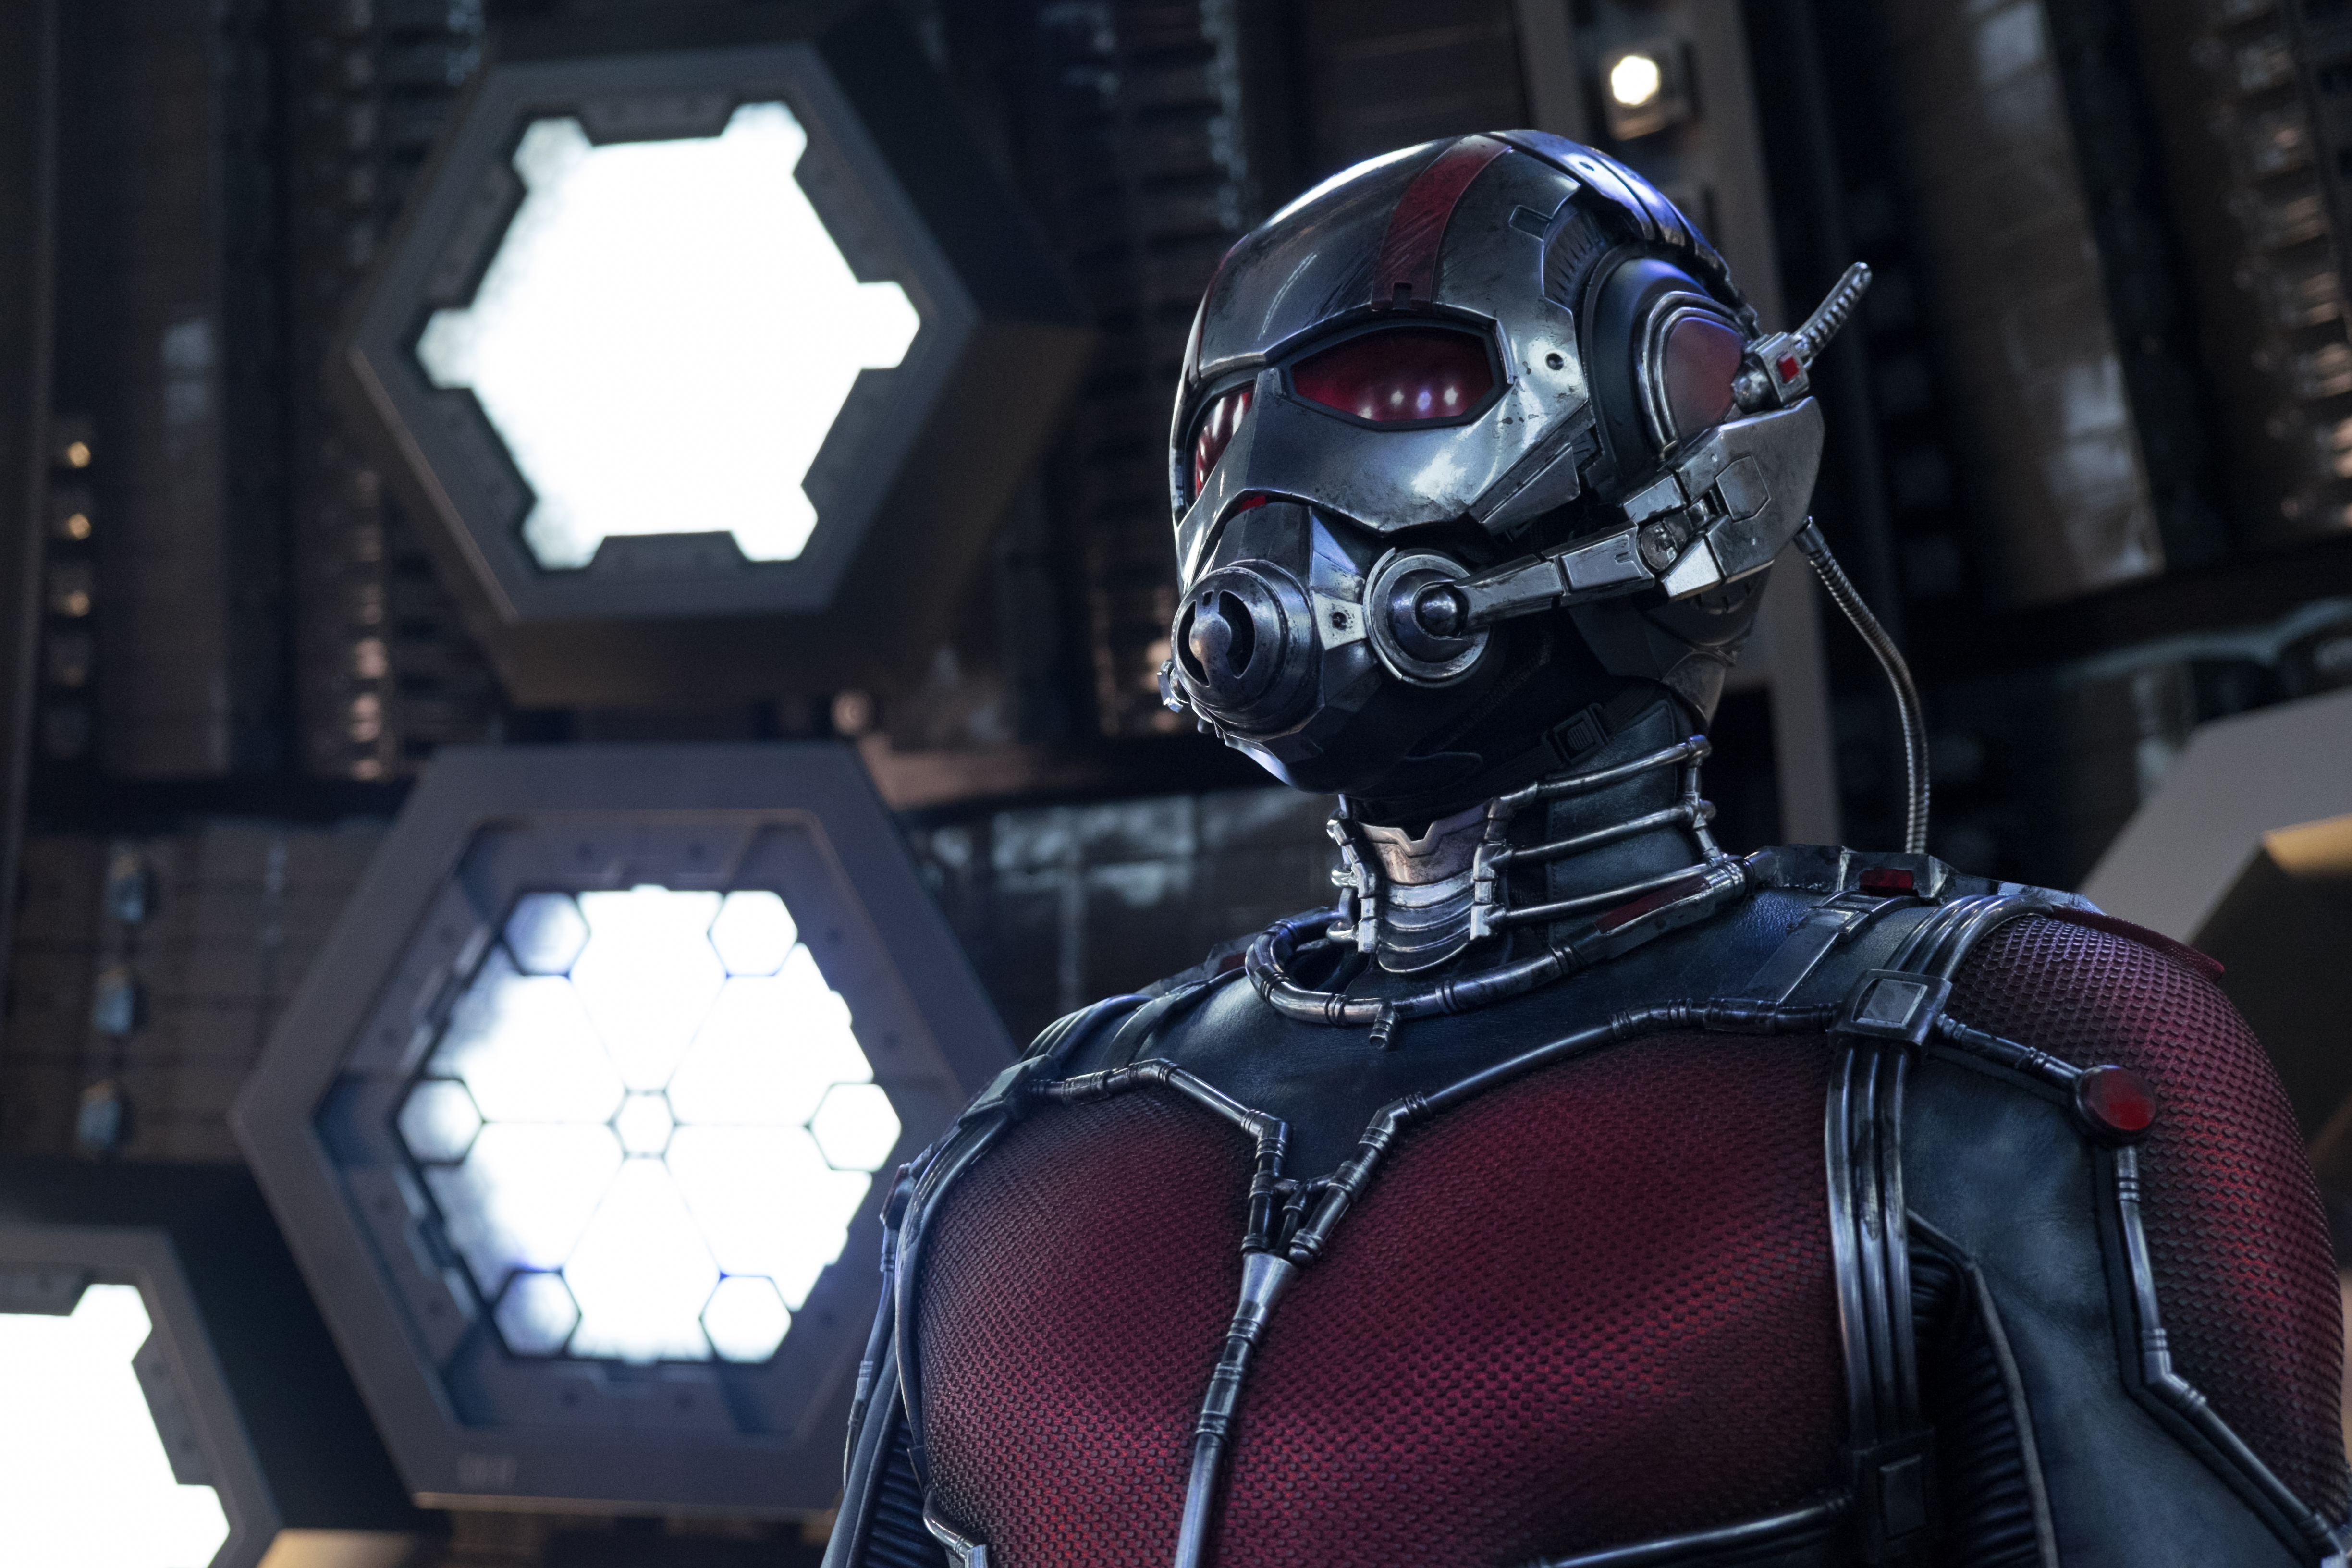 Ant Man 3: Release date, is there an Ant-Man Quantunmania end